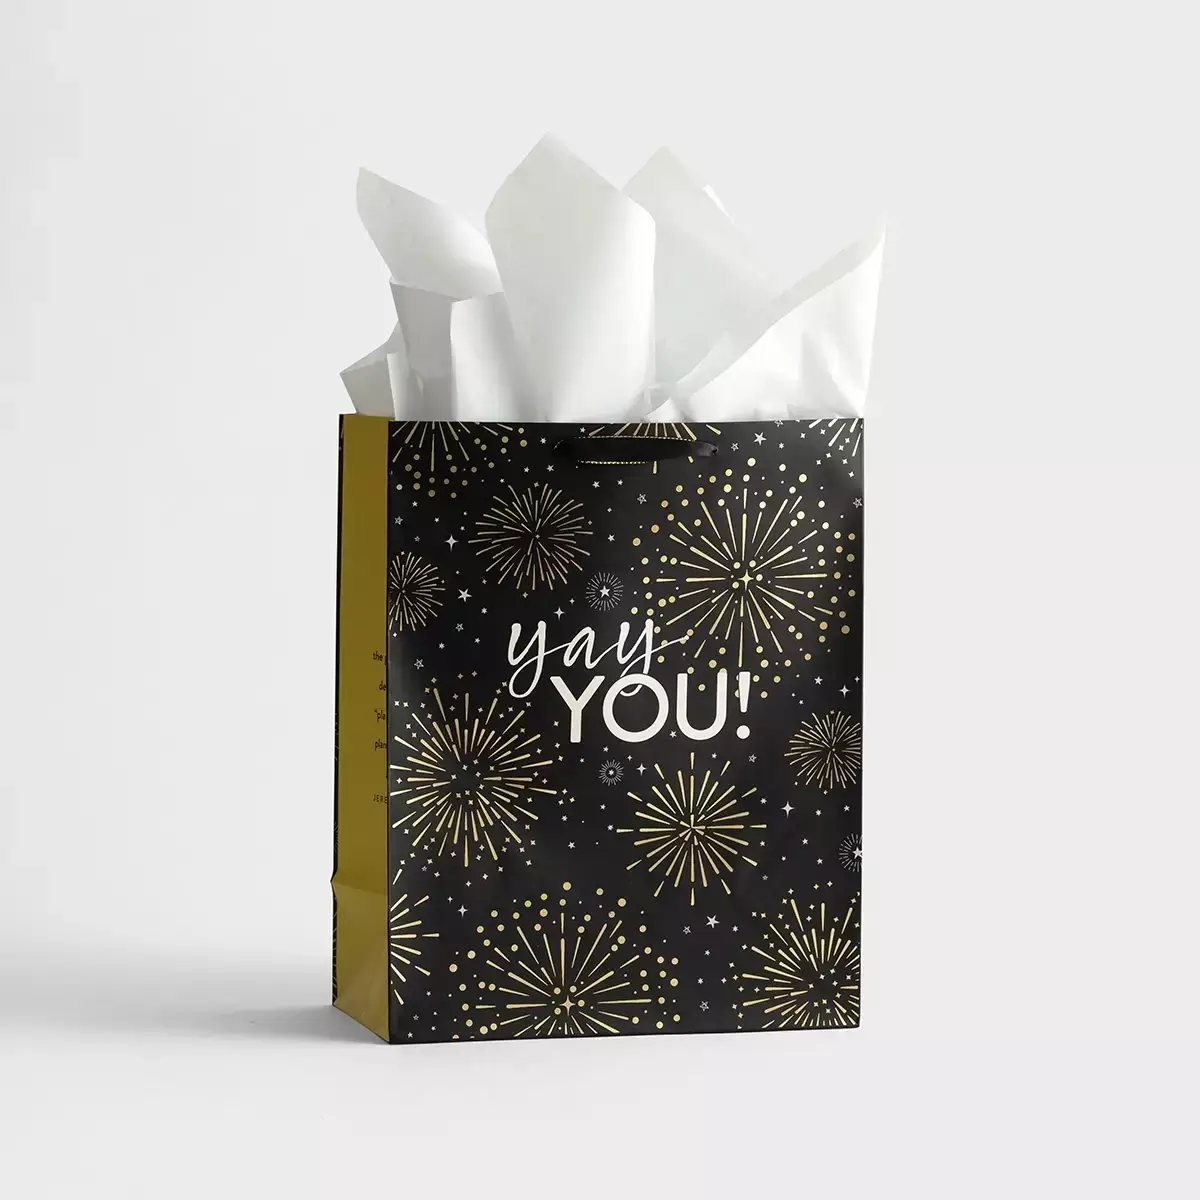 YAY YOU! (Fireworks) Large  Gift Bag with Tissue